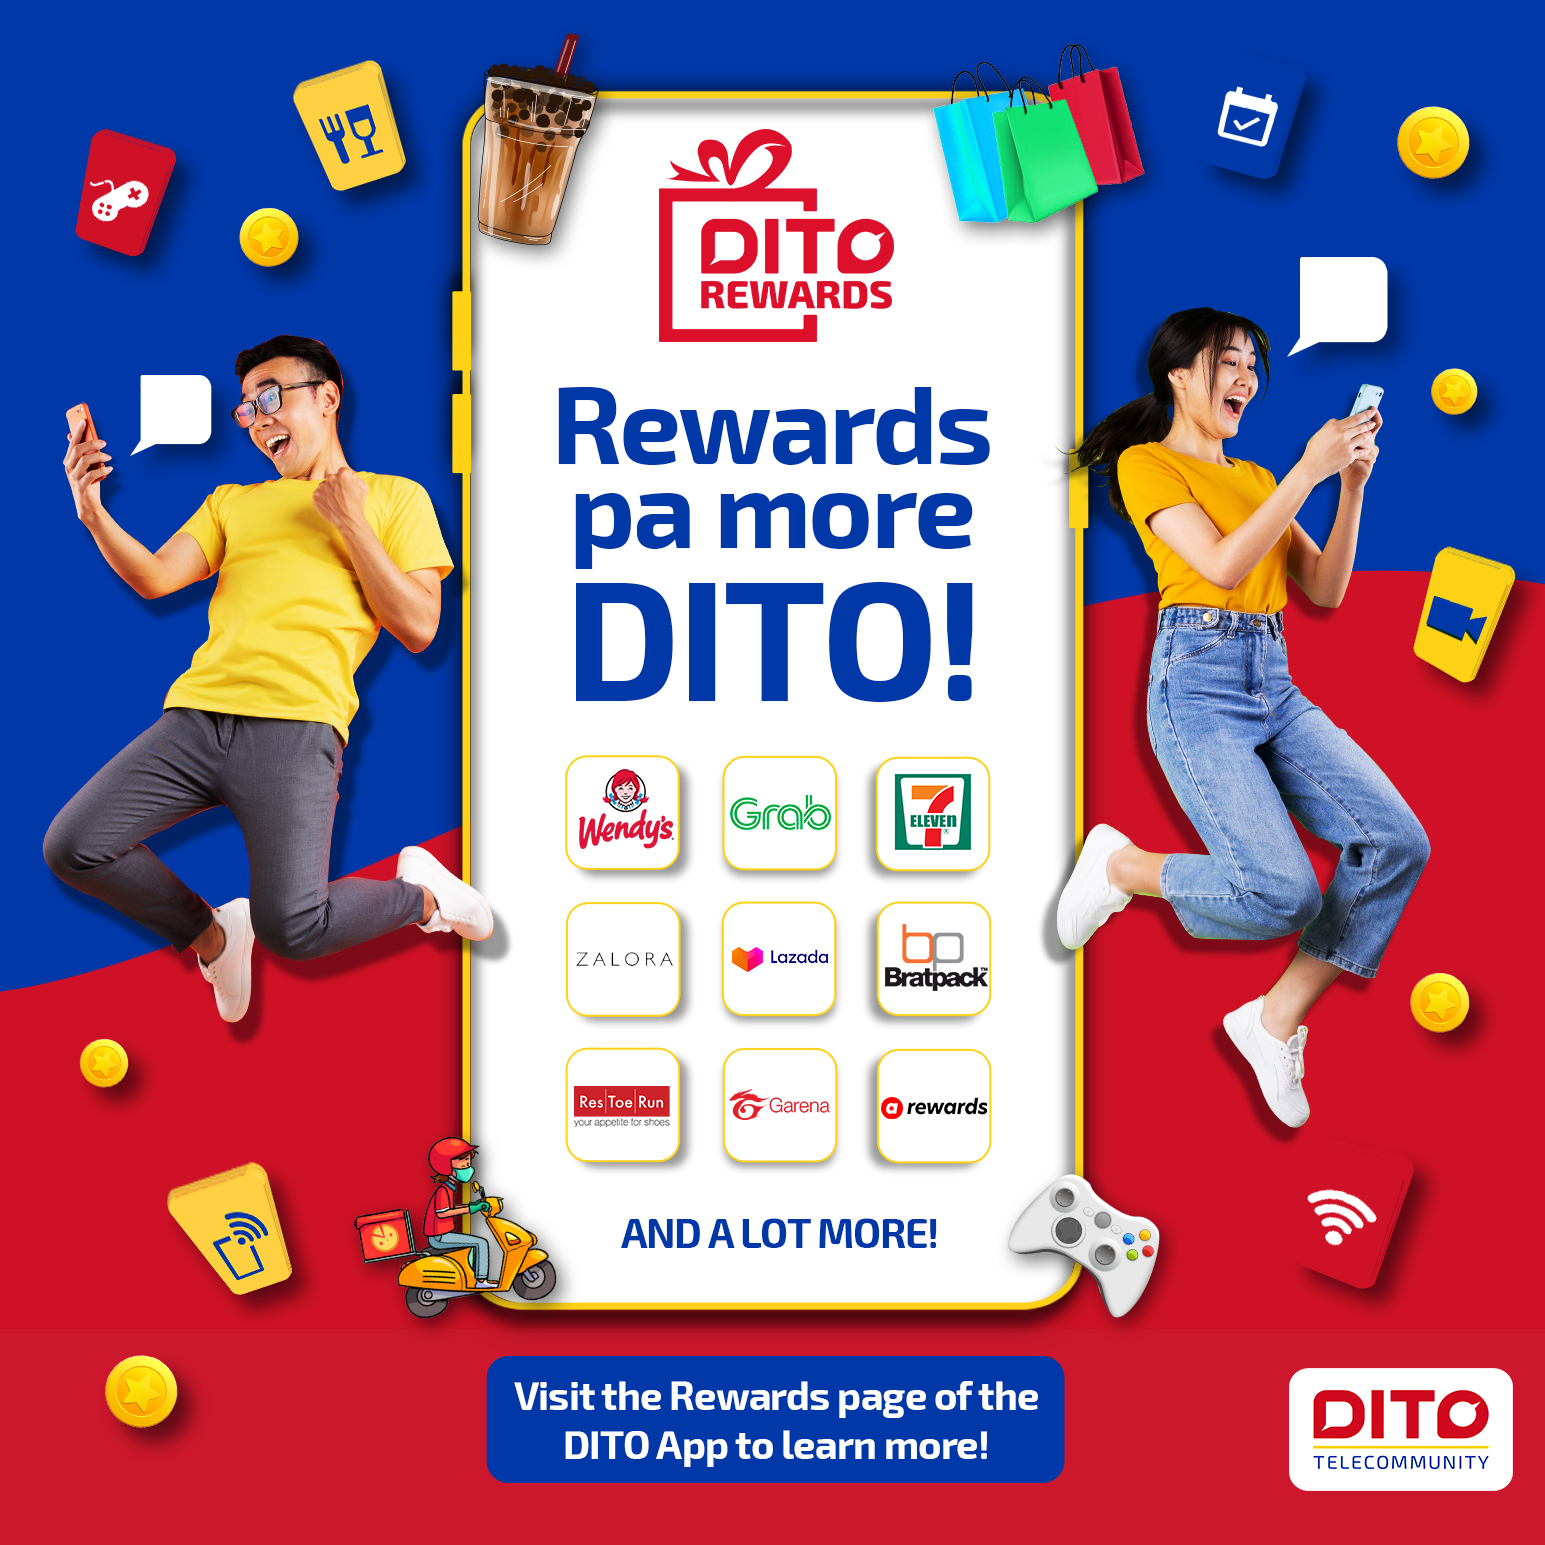 DITO expands Rewards Program with more exciting treats for loyal subscribers